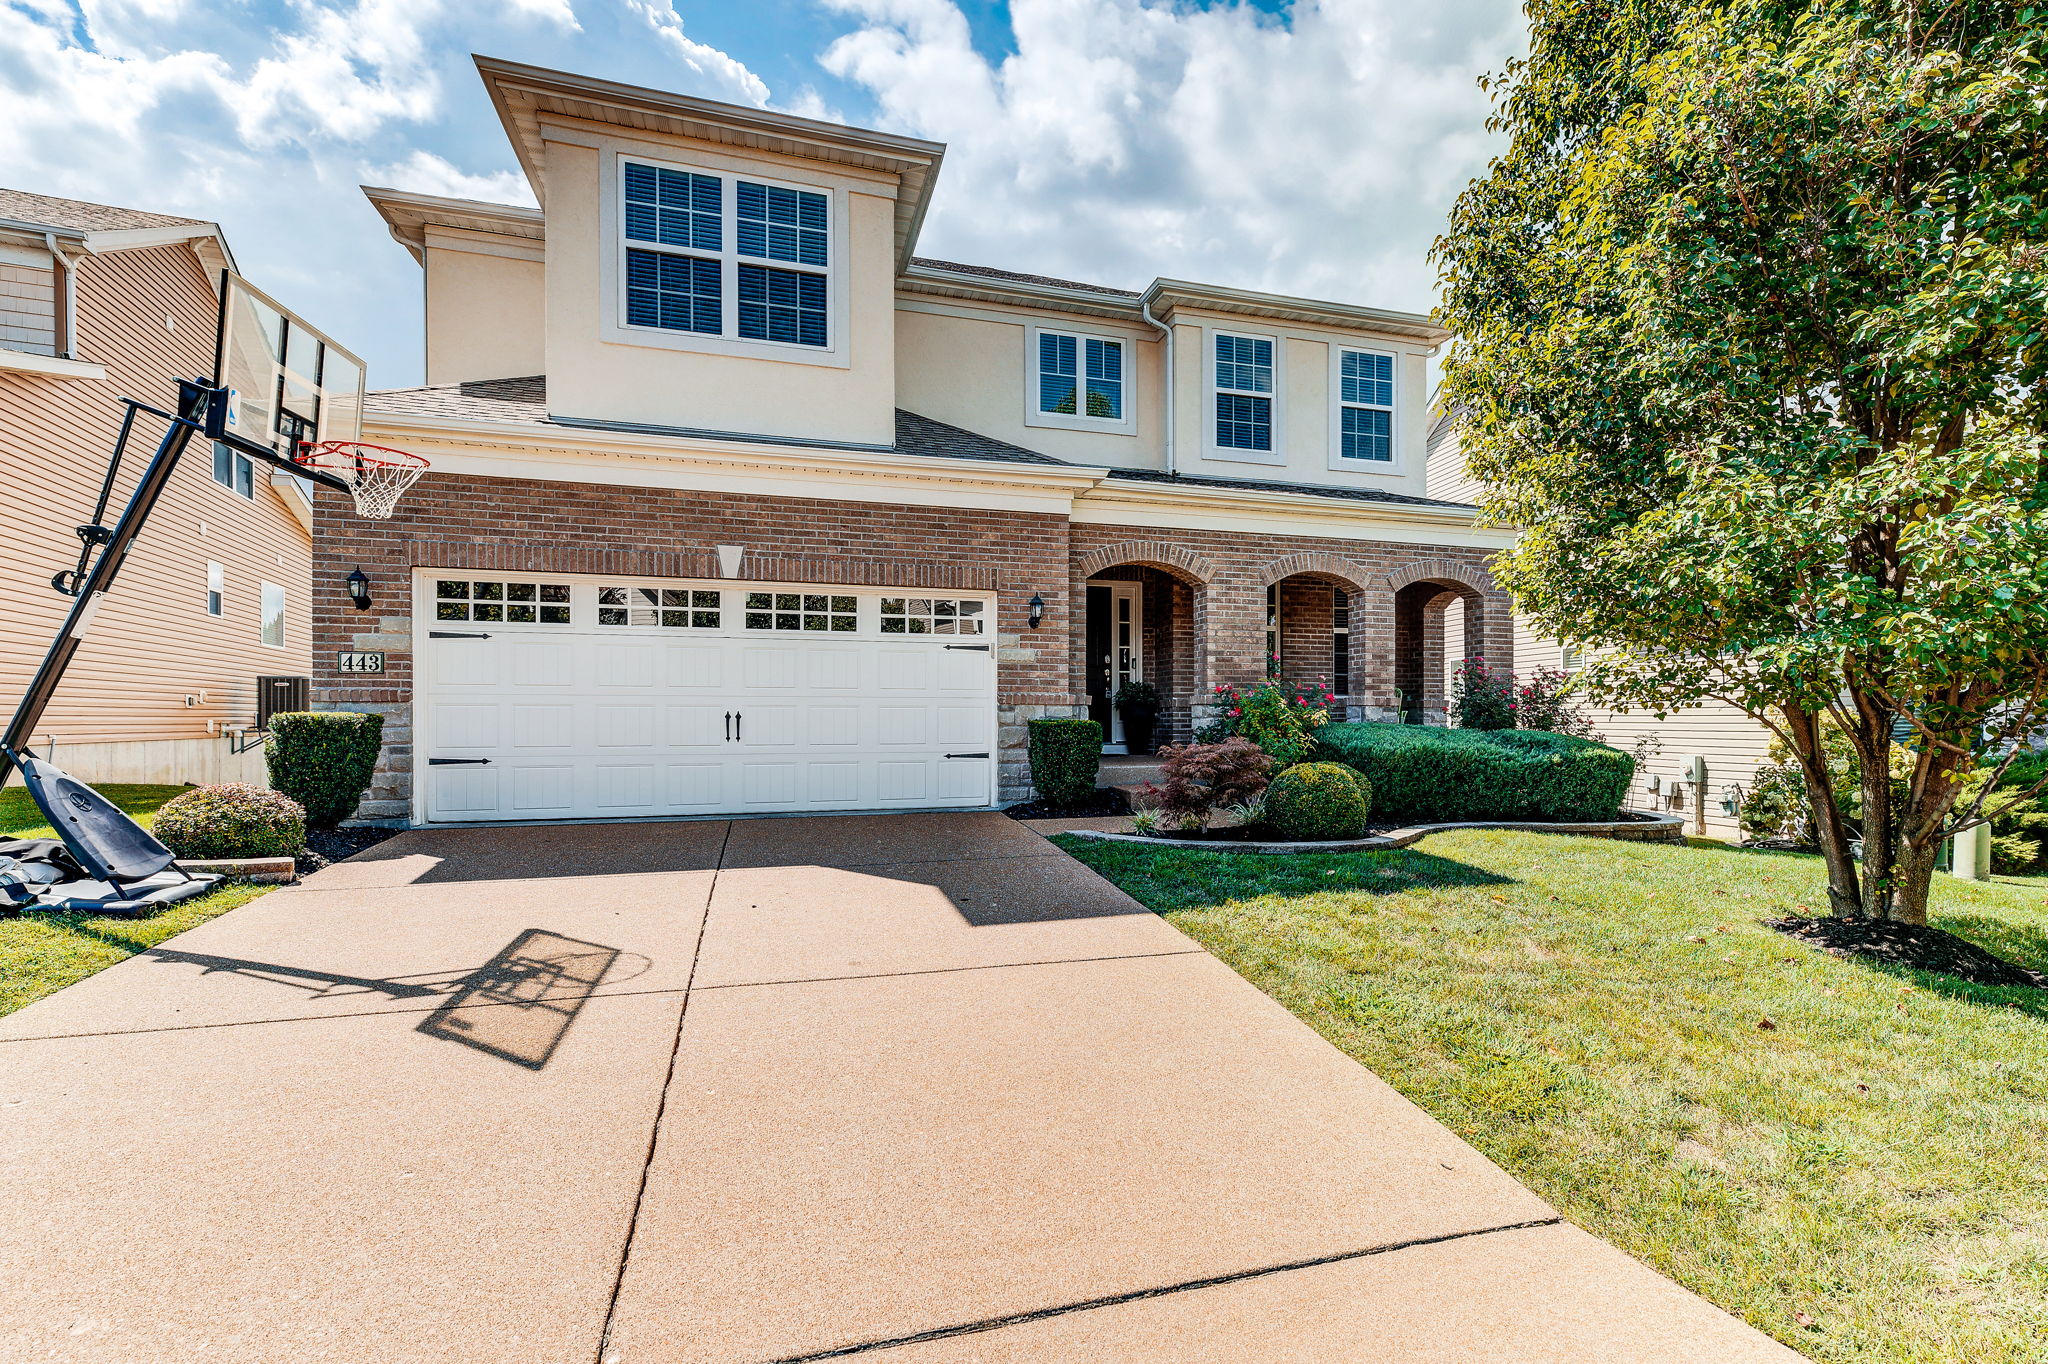  443 Maple Rise Path, Chesterfield, MO 63005, US